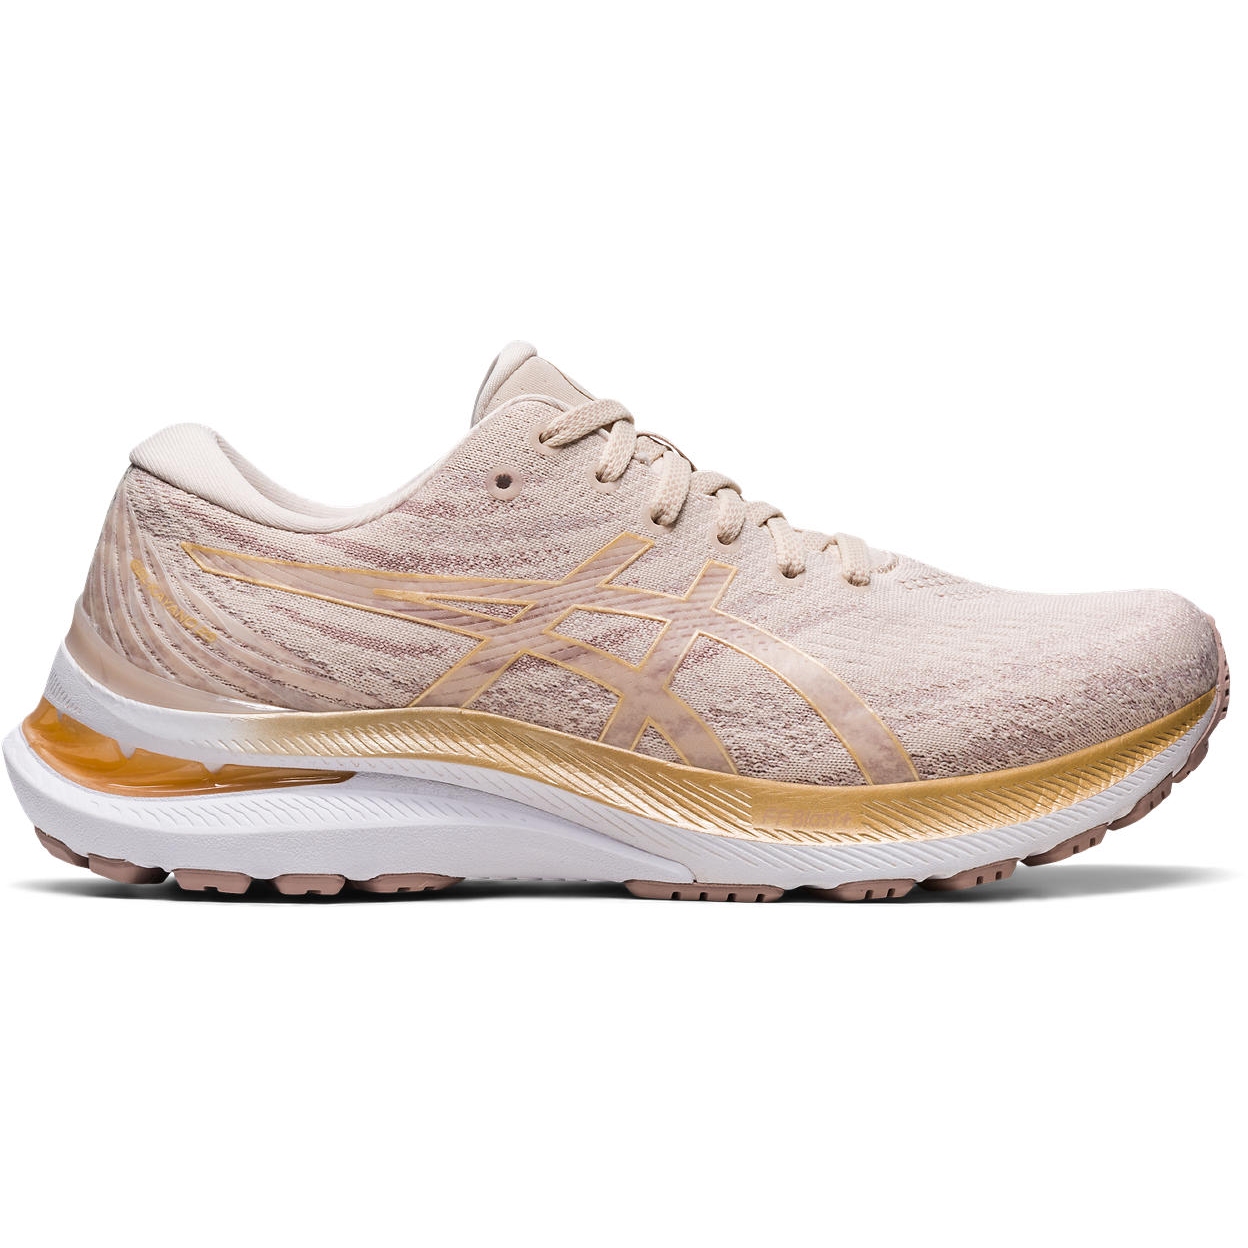 Picture of asics Gel-Kayano 29 Running Shoes Women - mineral beige/champagne